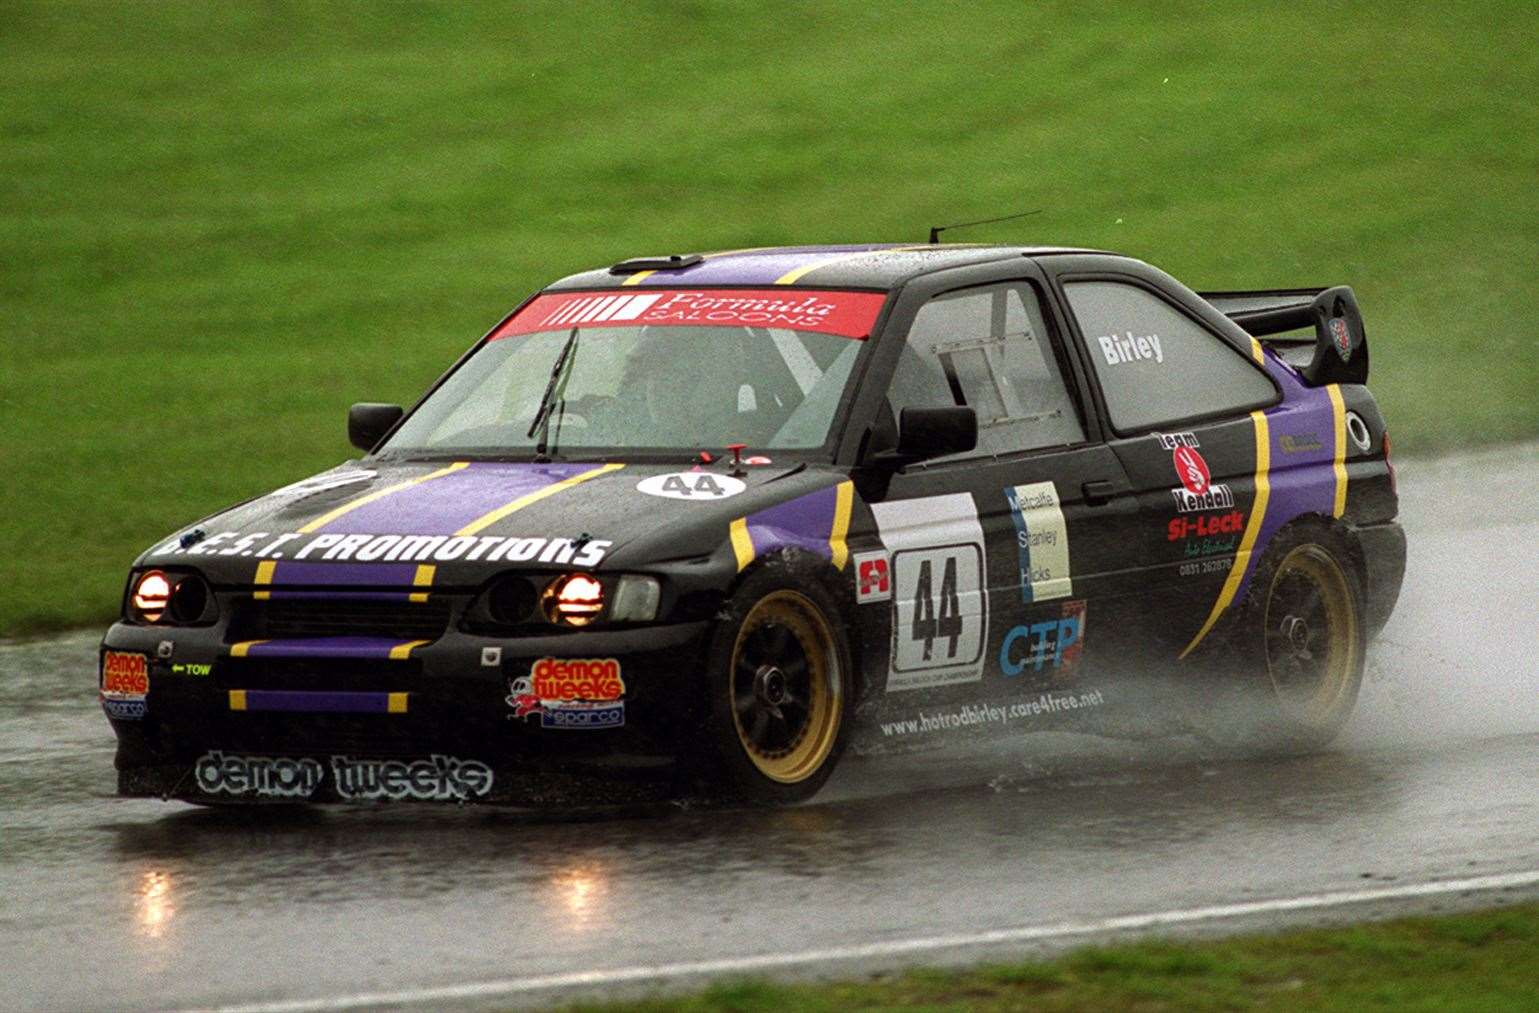 Birley has raced the Ford Escort Cosworth WRC for decades; he's pictured here at Brands Hatch in May 2002